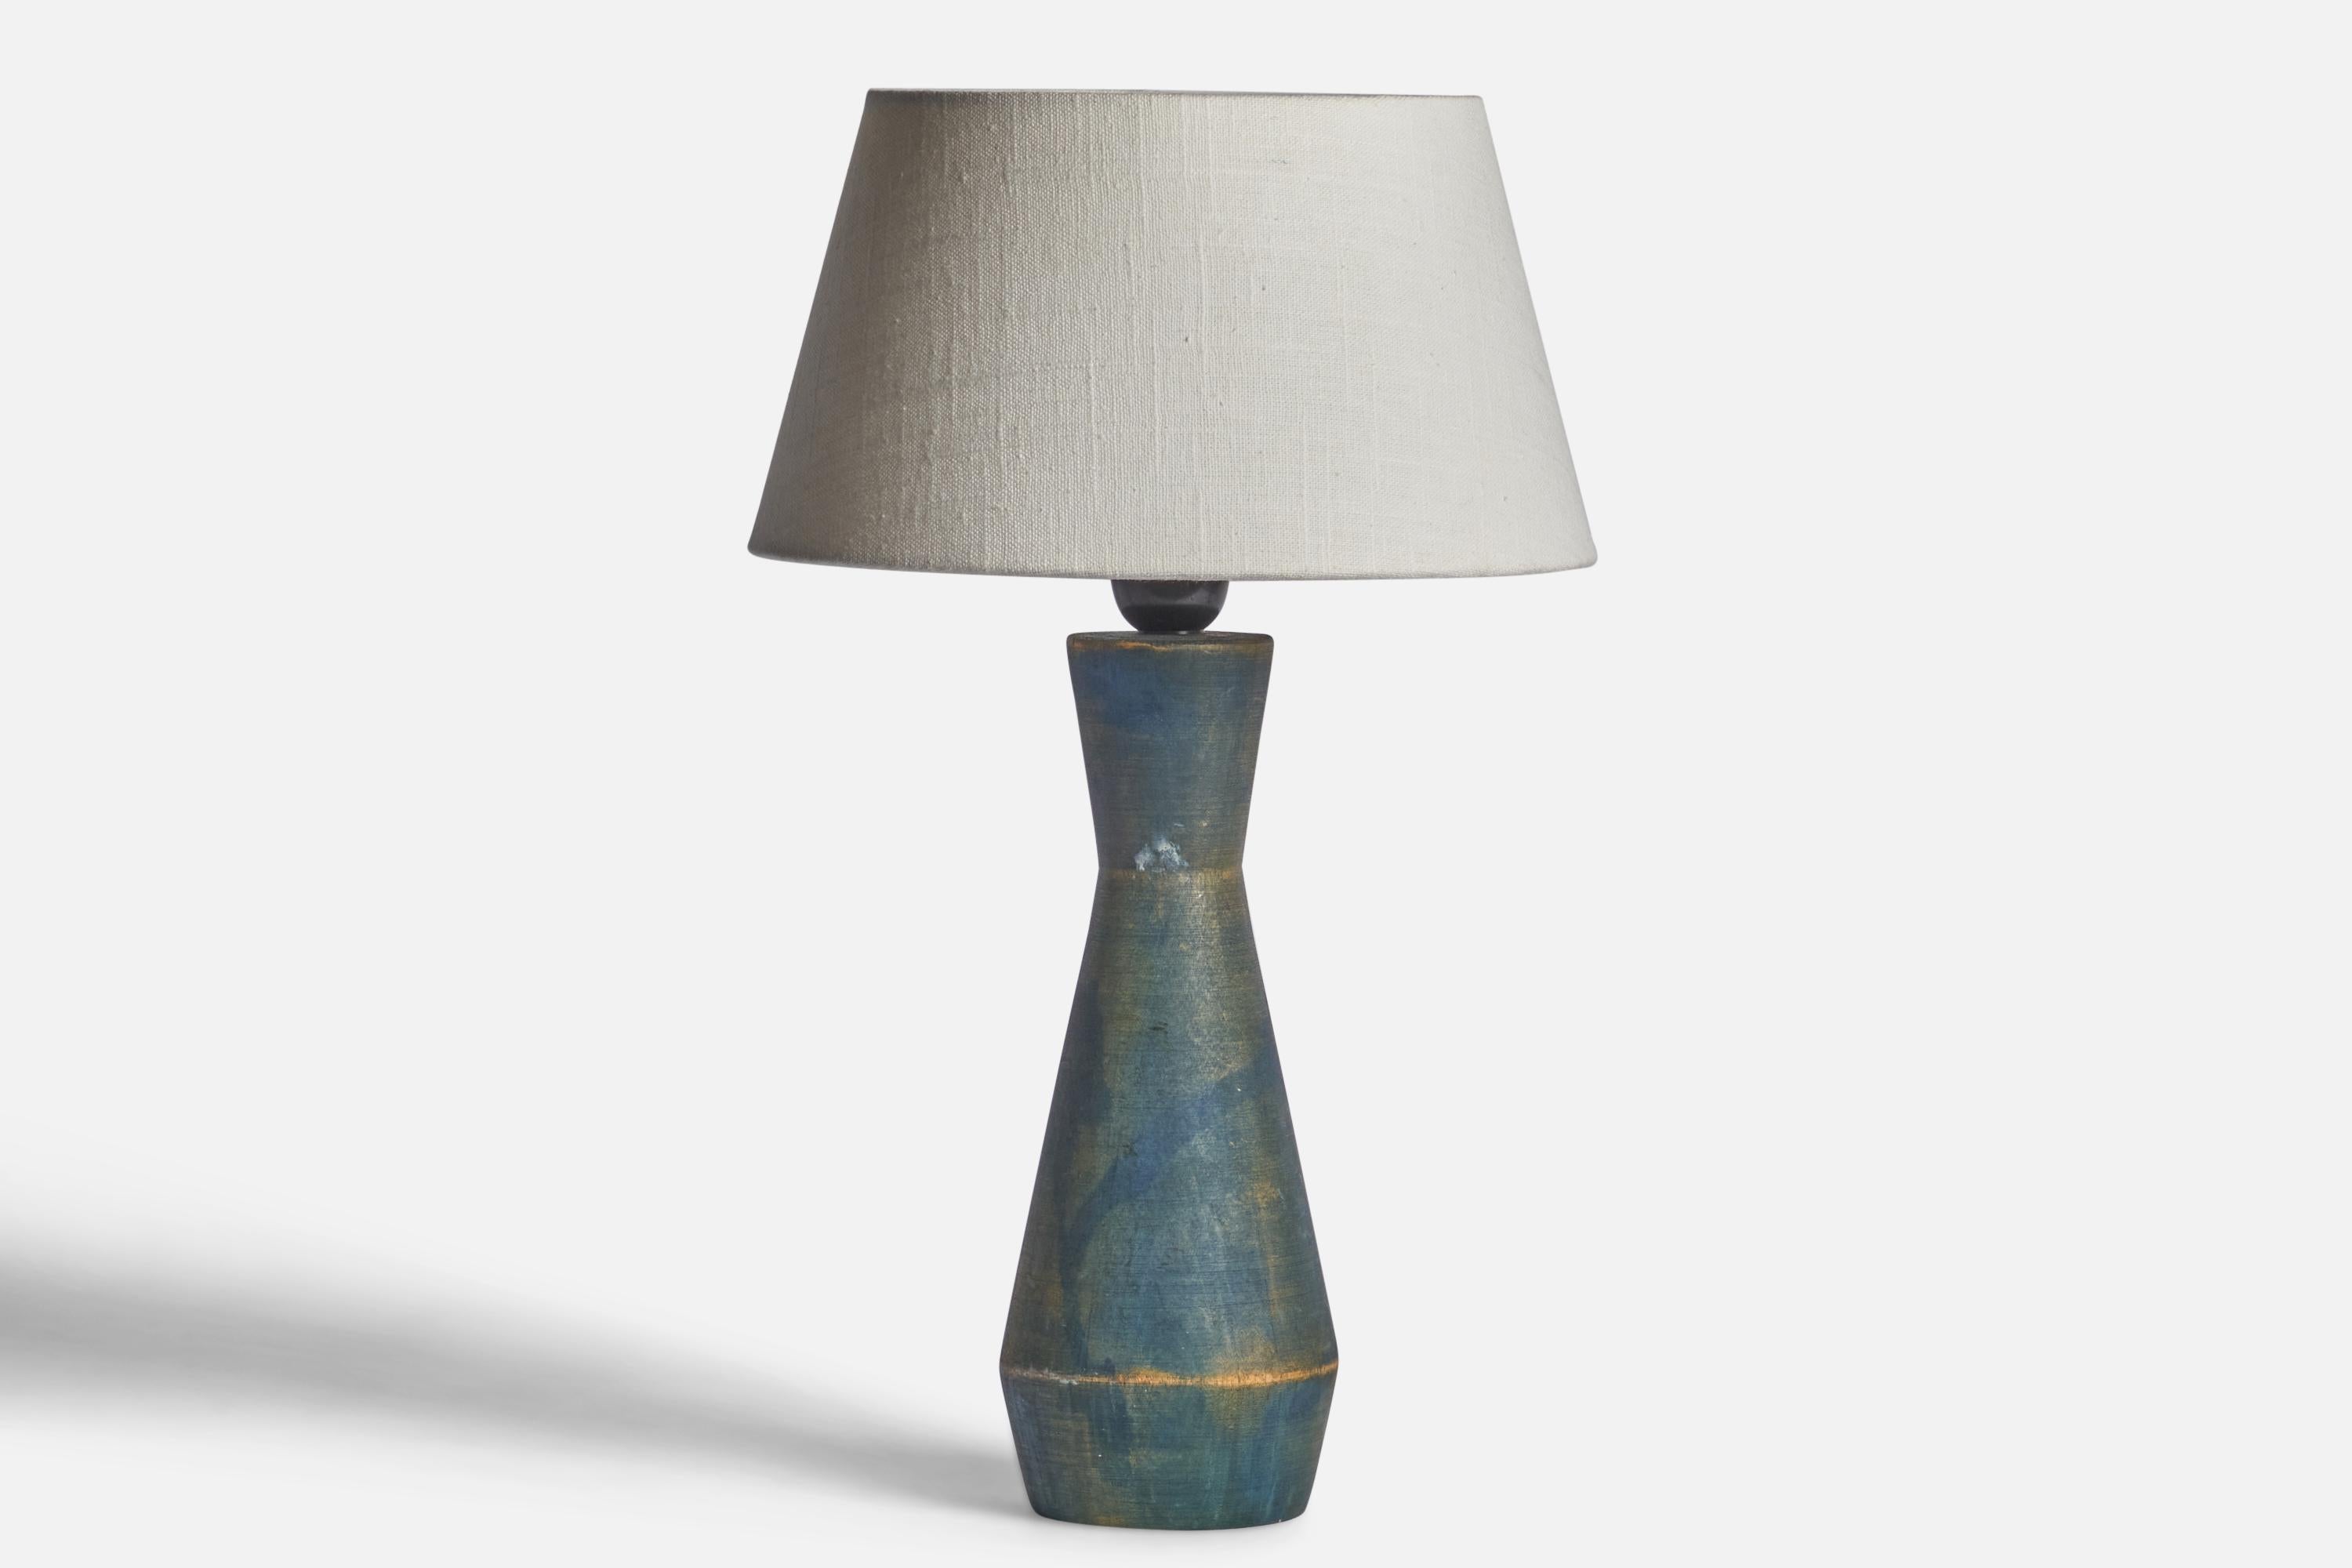 A blue-painted wood table lamp designed and produced in Sweden, 1970s. 

Dimensions of Lamp (inches): 13.35” H x 4.15